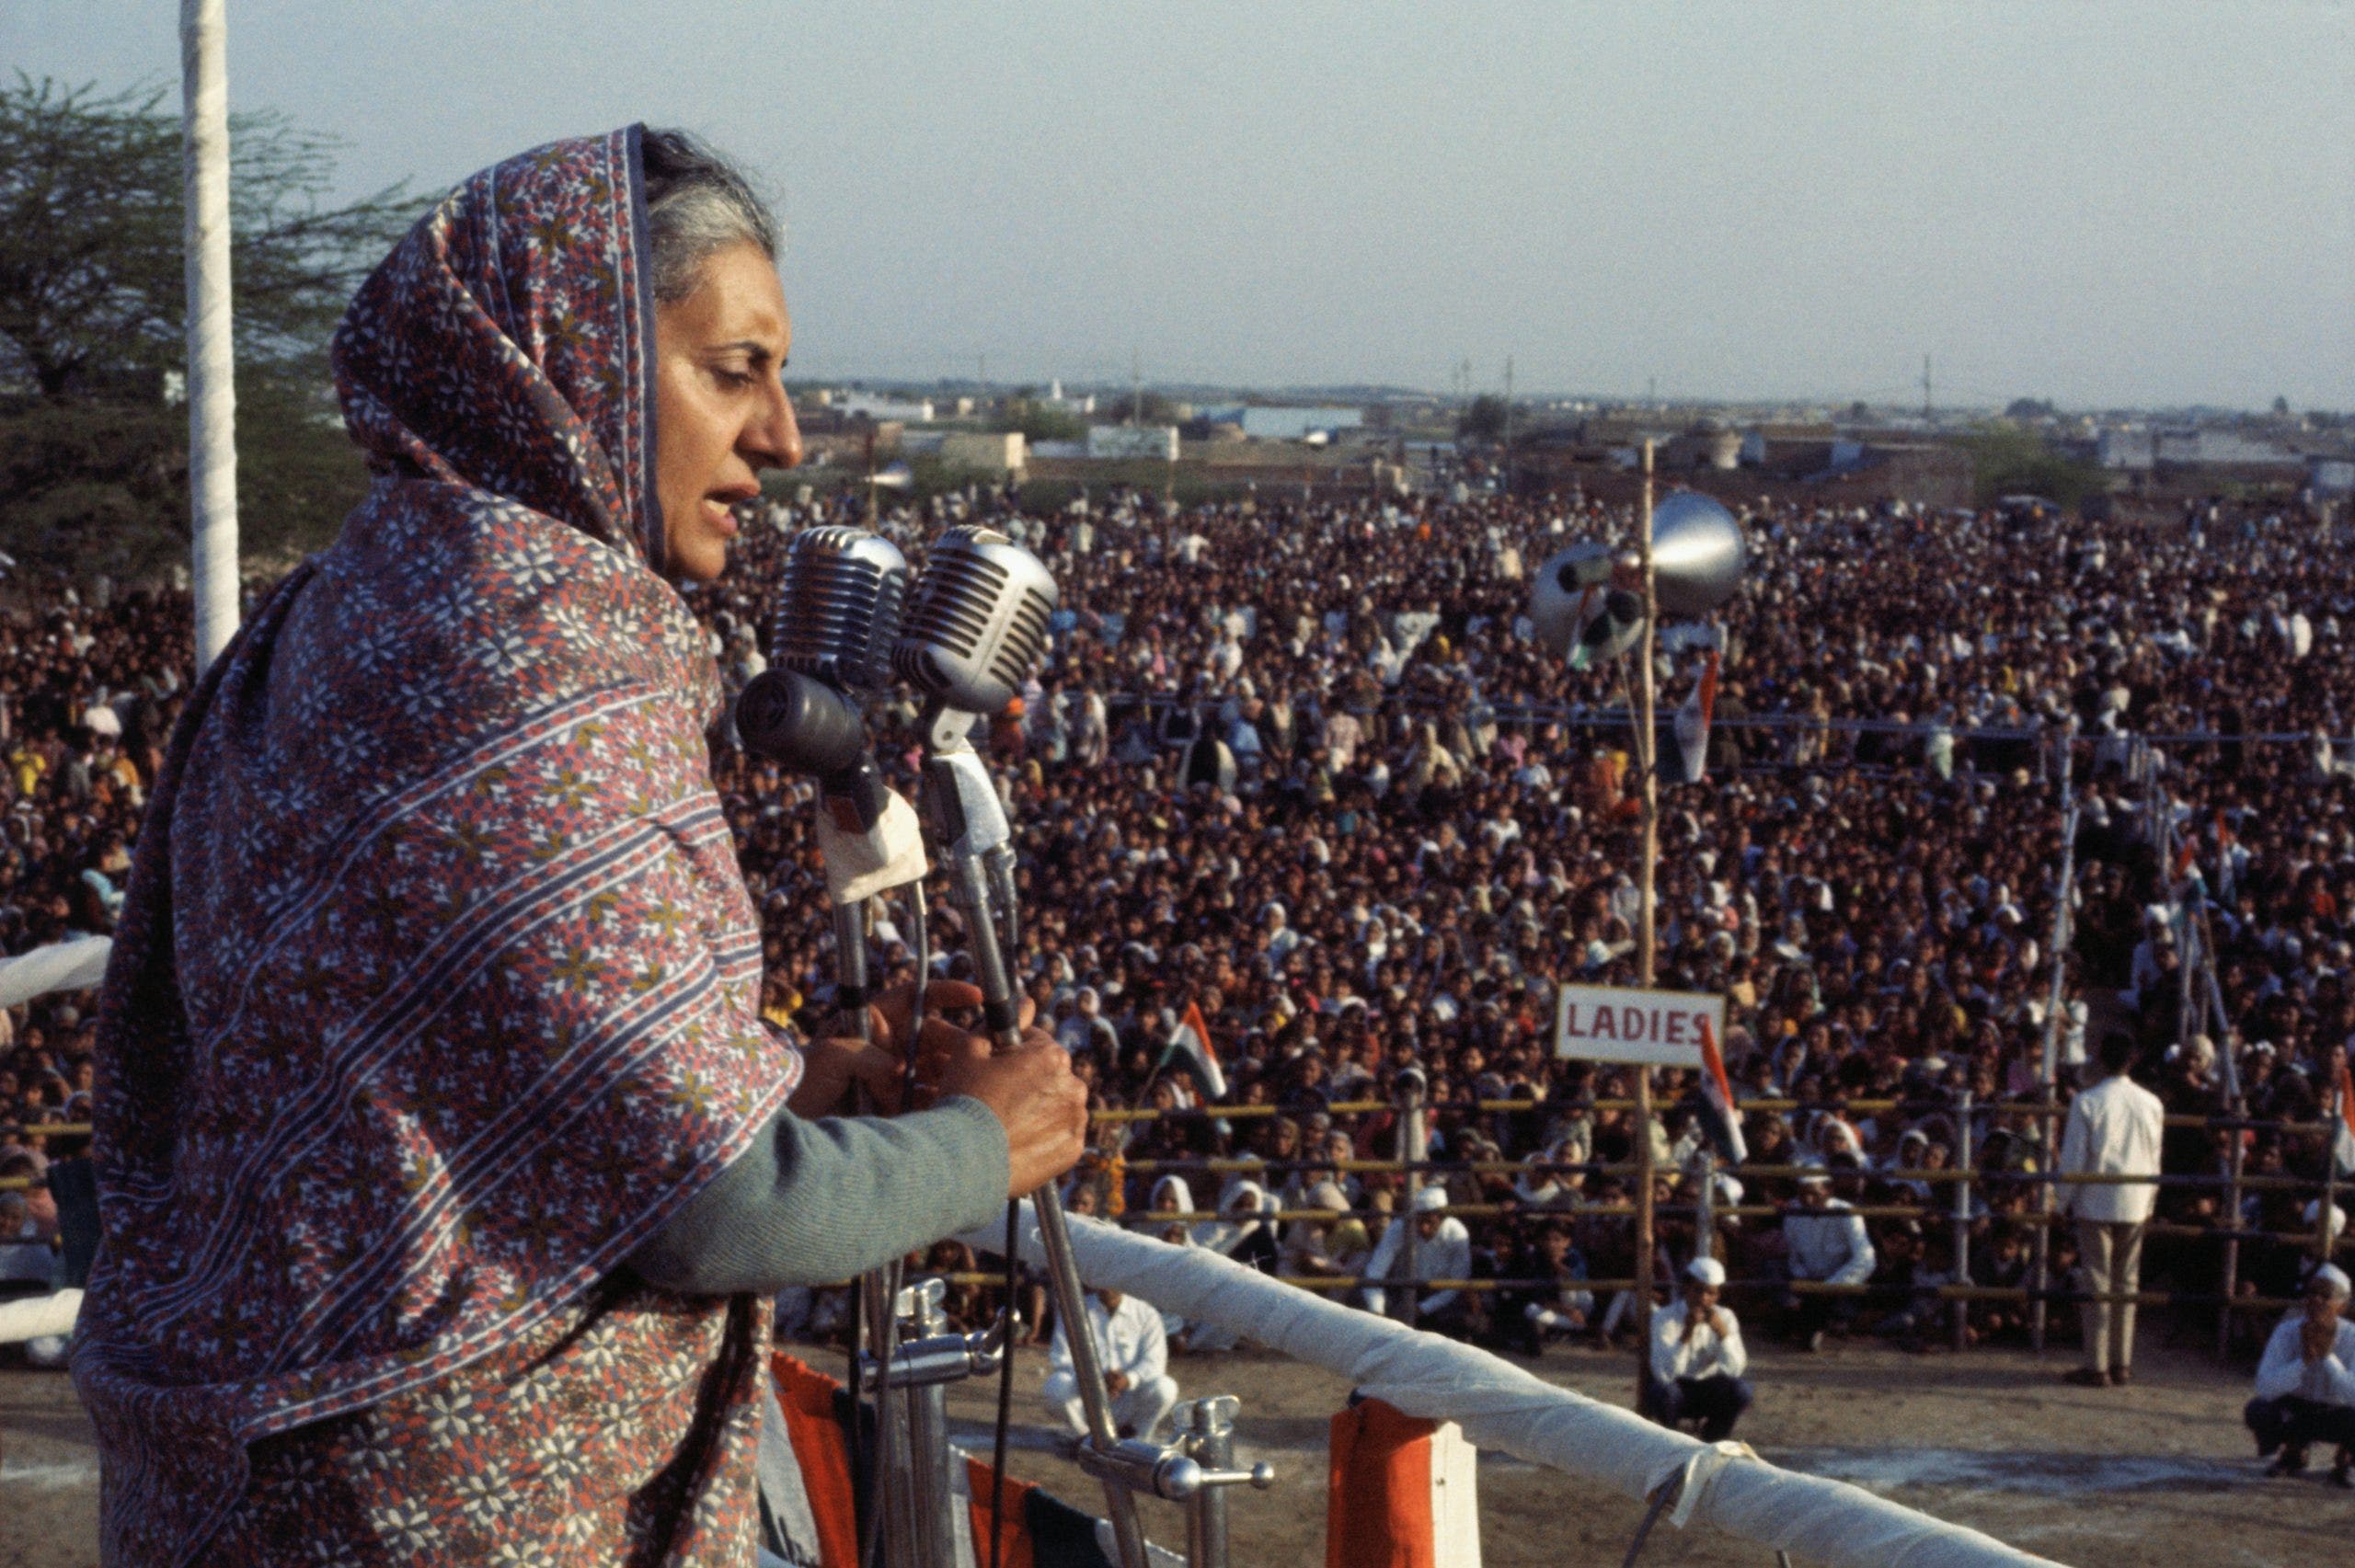 The Mystery of Indira Gandhi's assassination by her own bodyguards